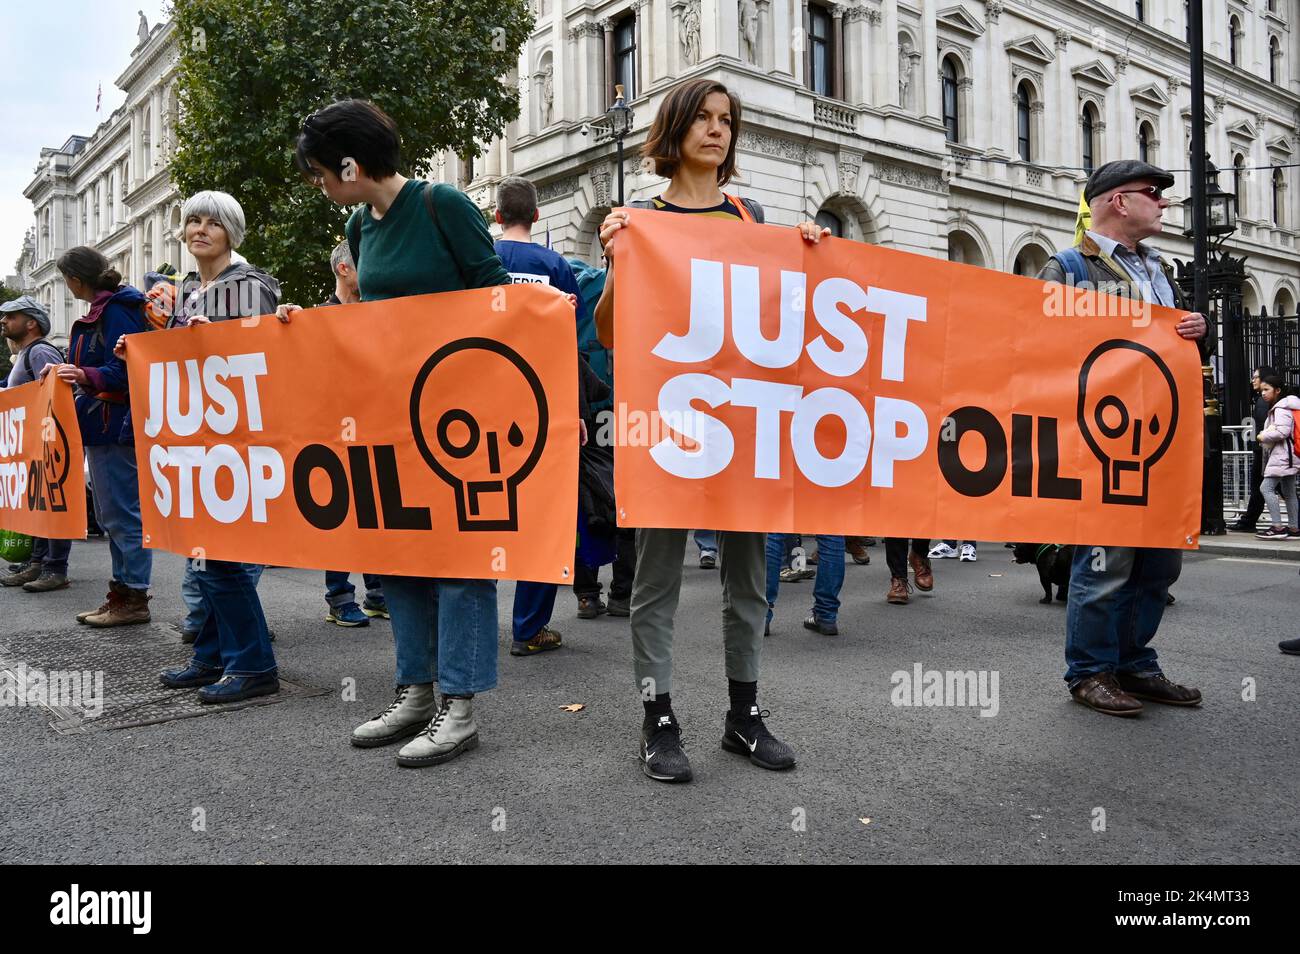 London, UK. Just Stop Oil Protest in Whitehall, Westminster. A group of activists staged a sit in outside No 10 Downing Street and Trafalgar Square. They have pledged to return every day until the government meets their demands. Stock Photo